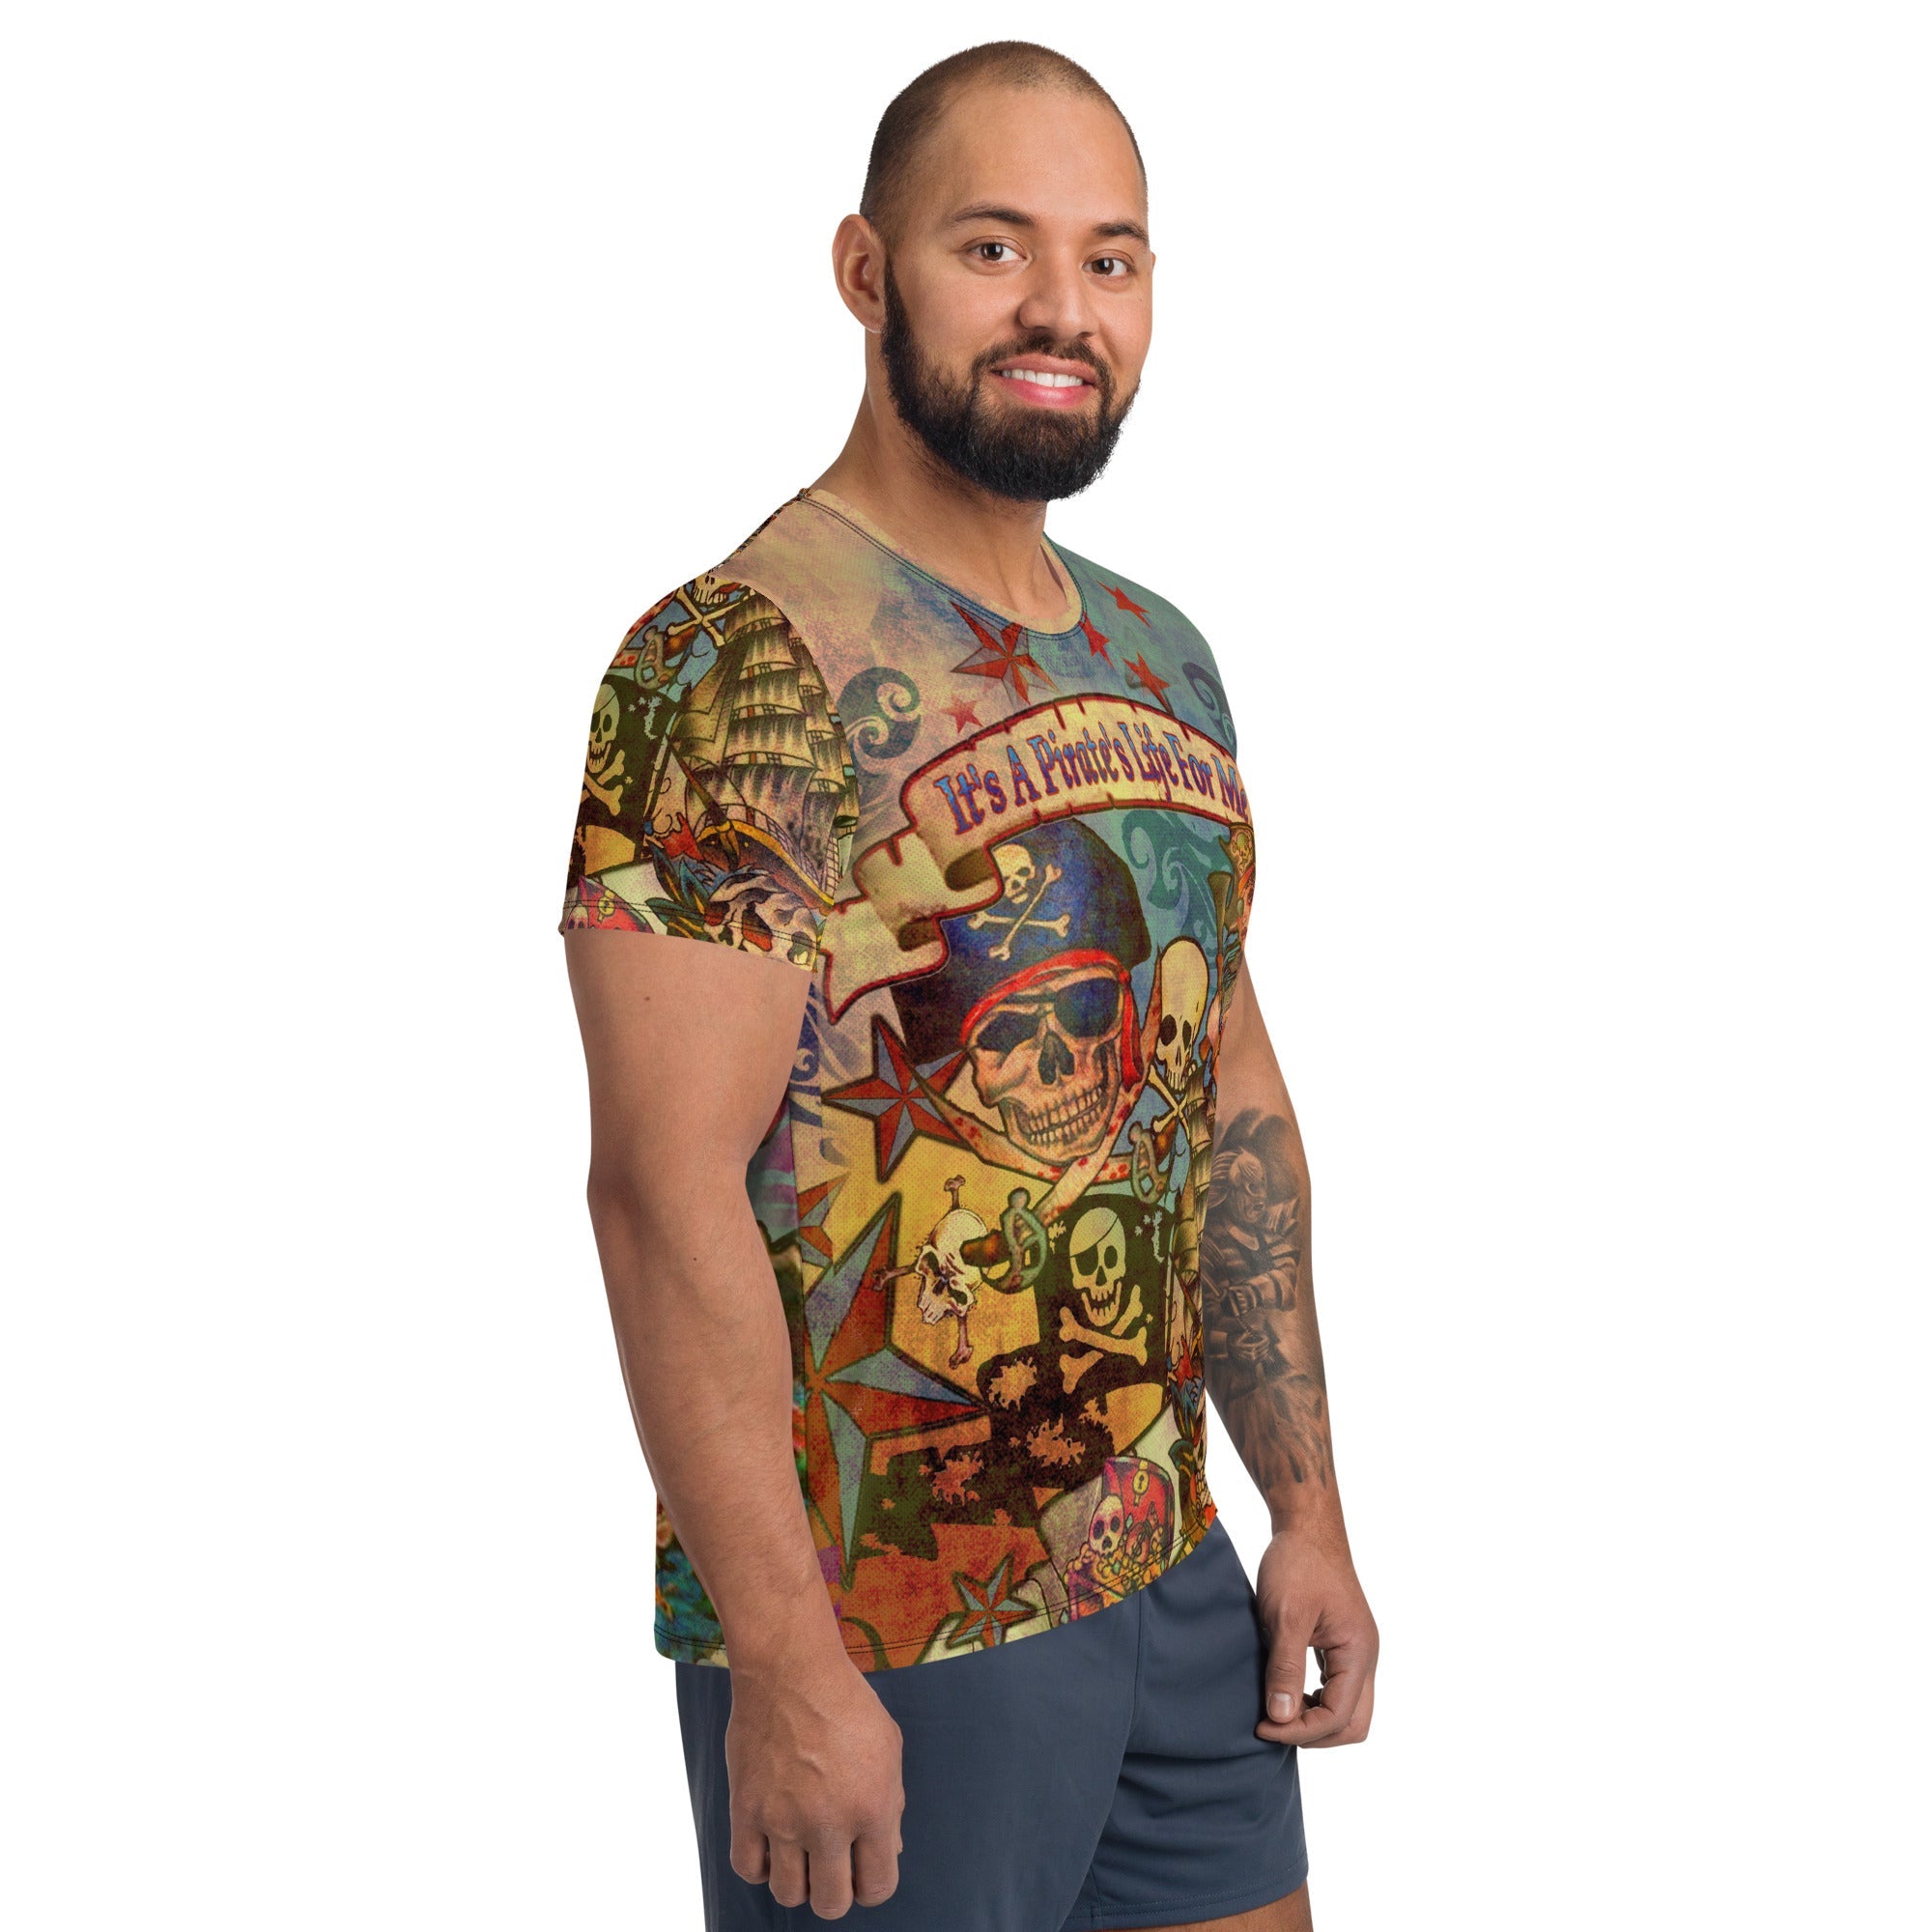 "THE PIRATE TATTOO MUSCLE TEE" for men